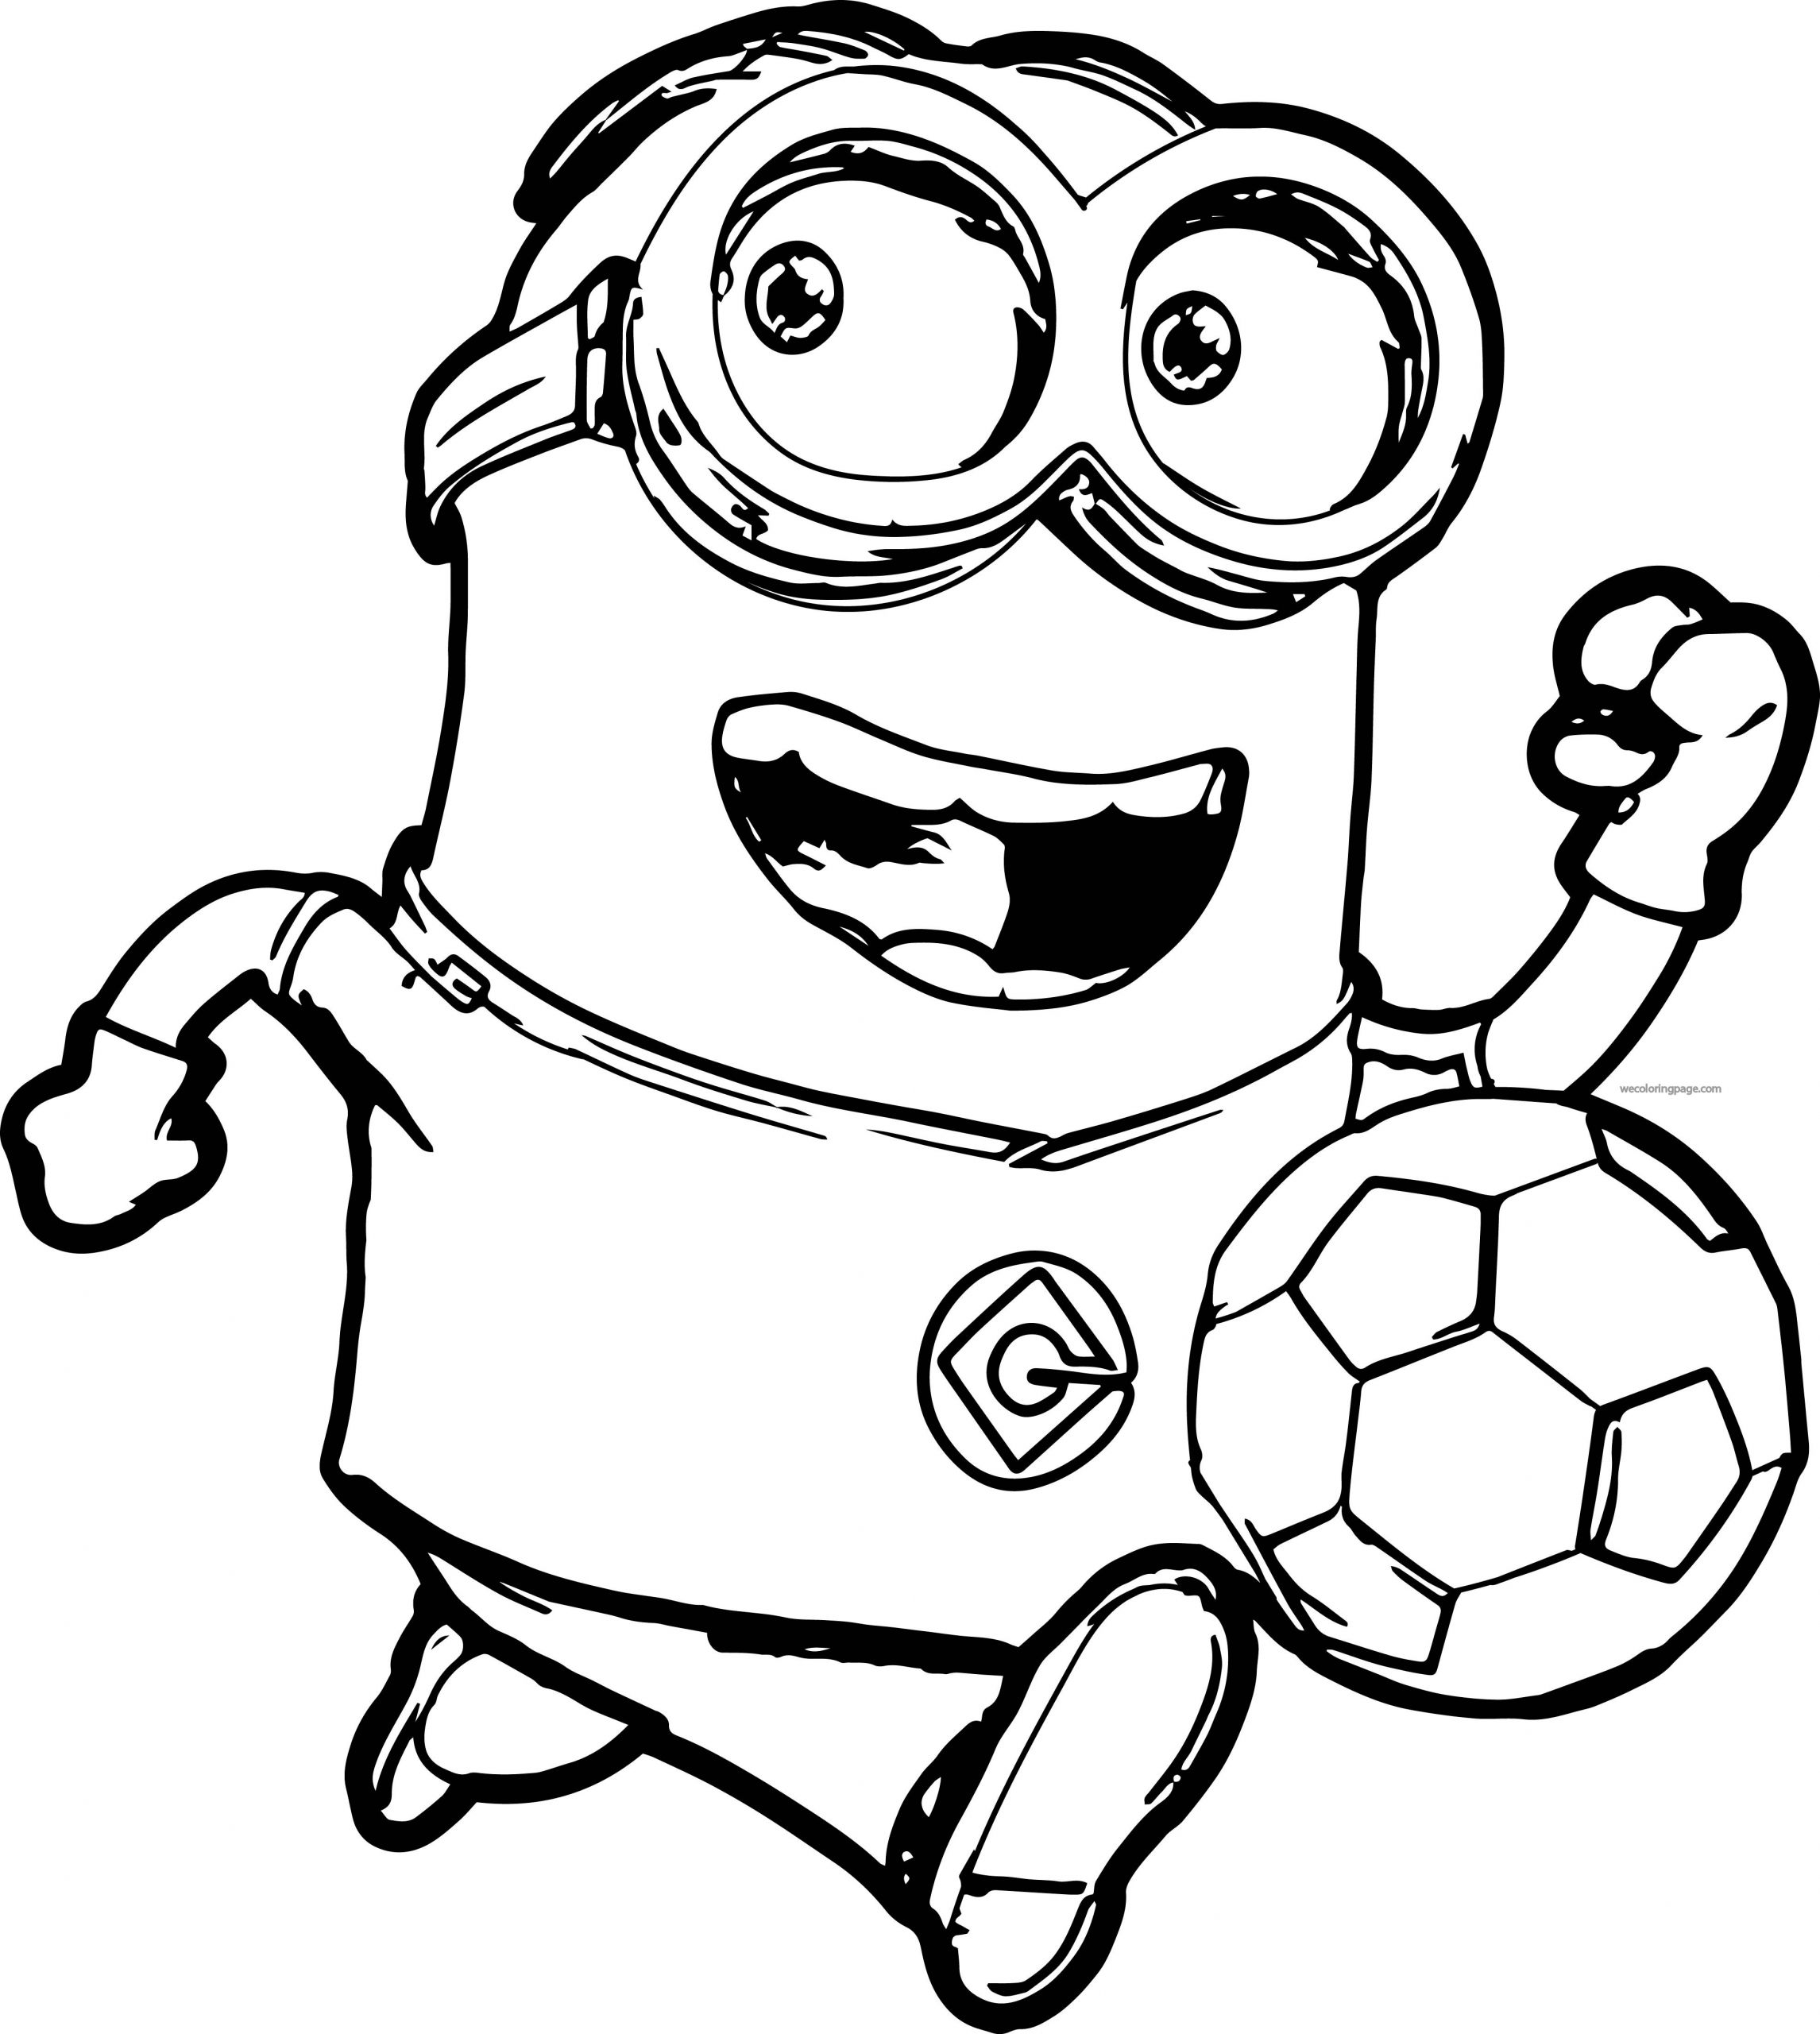 Coloring Pages For Kids Minion
 Minion Coloring Pages Best Coloring Pages For Kids